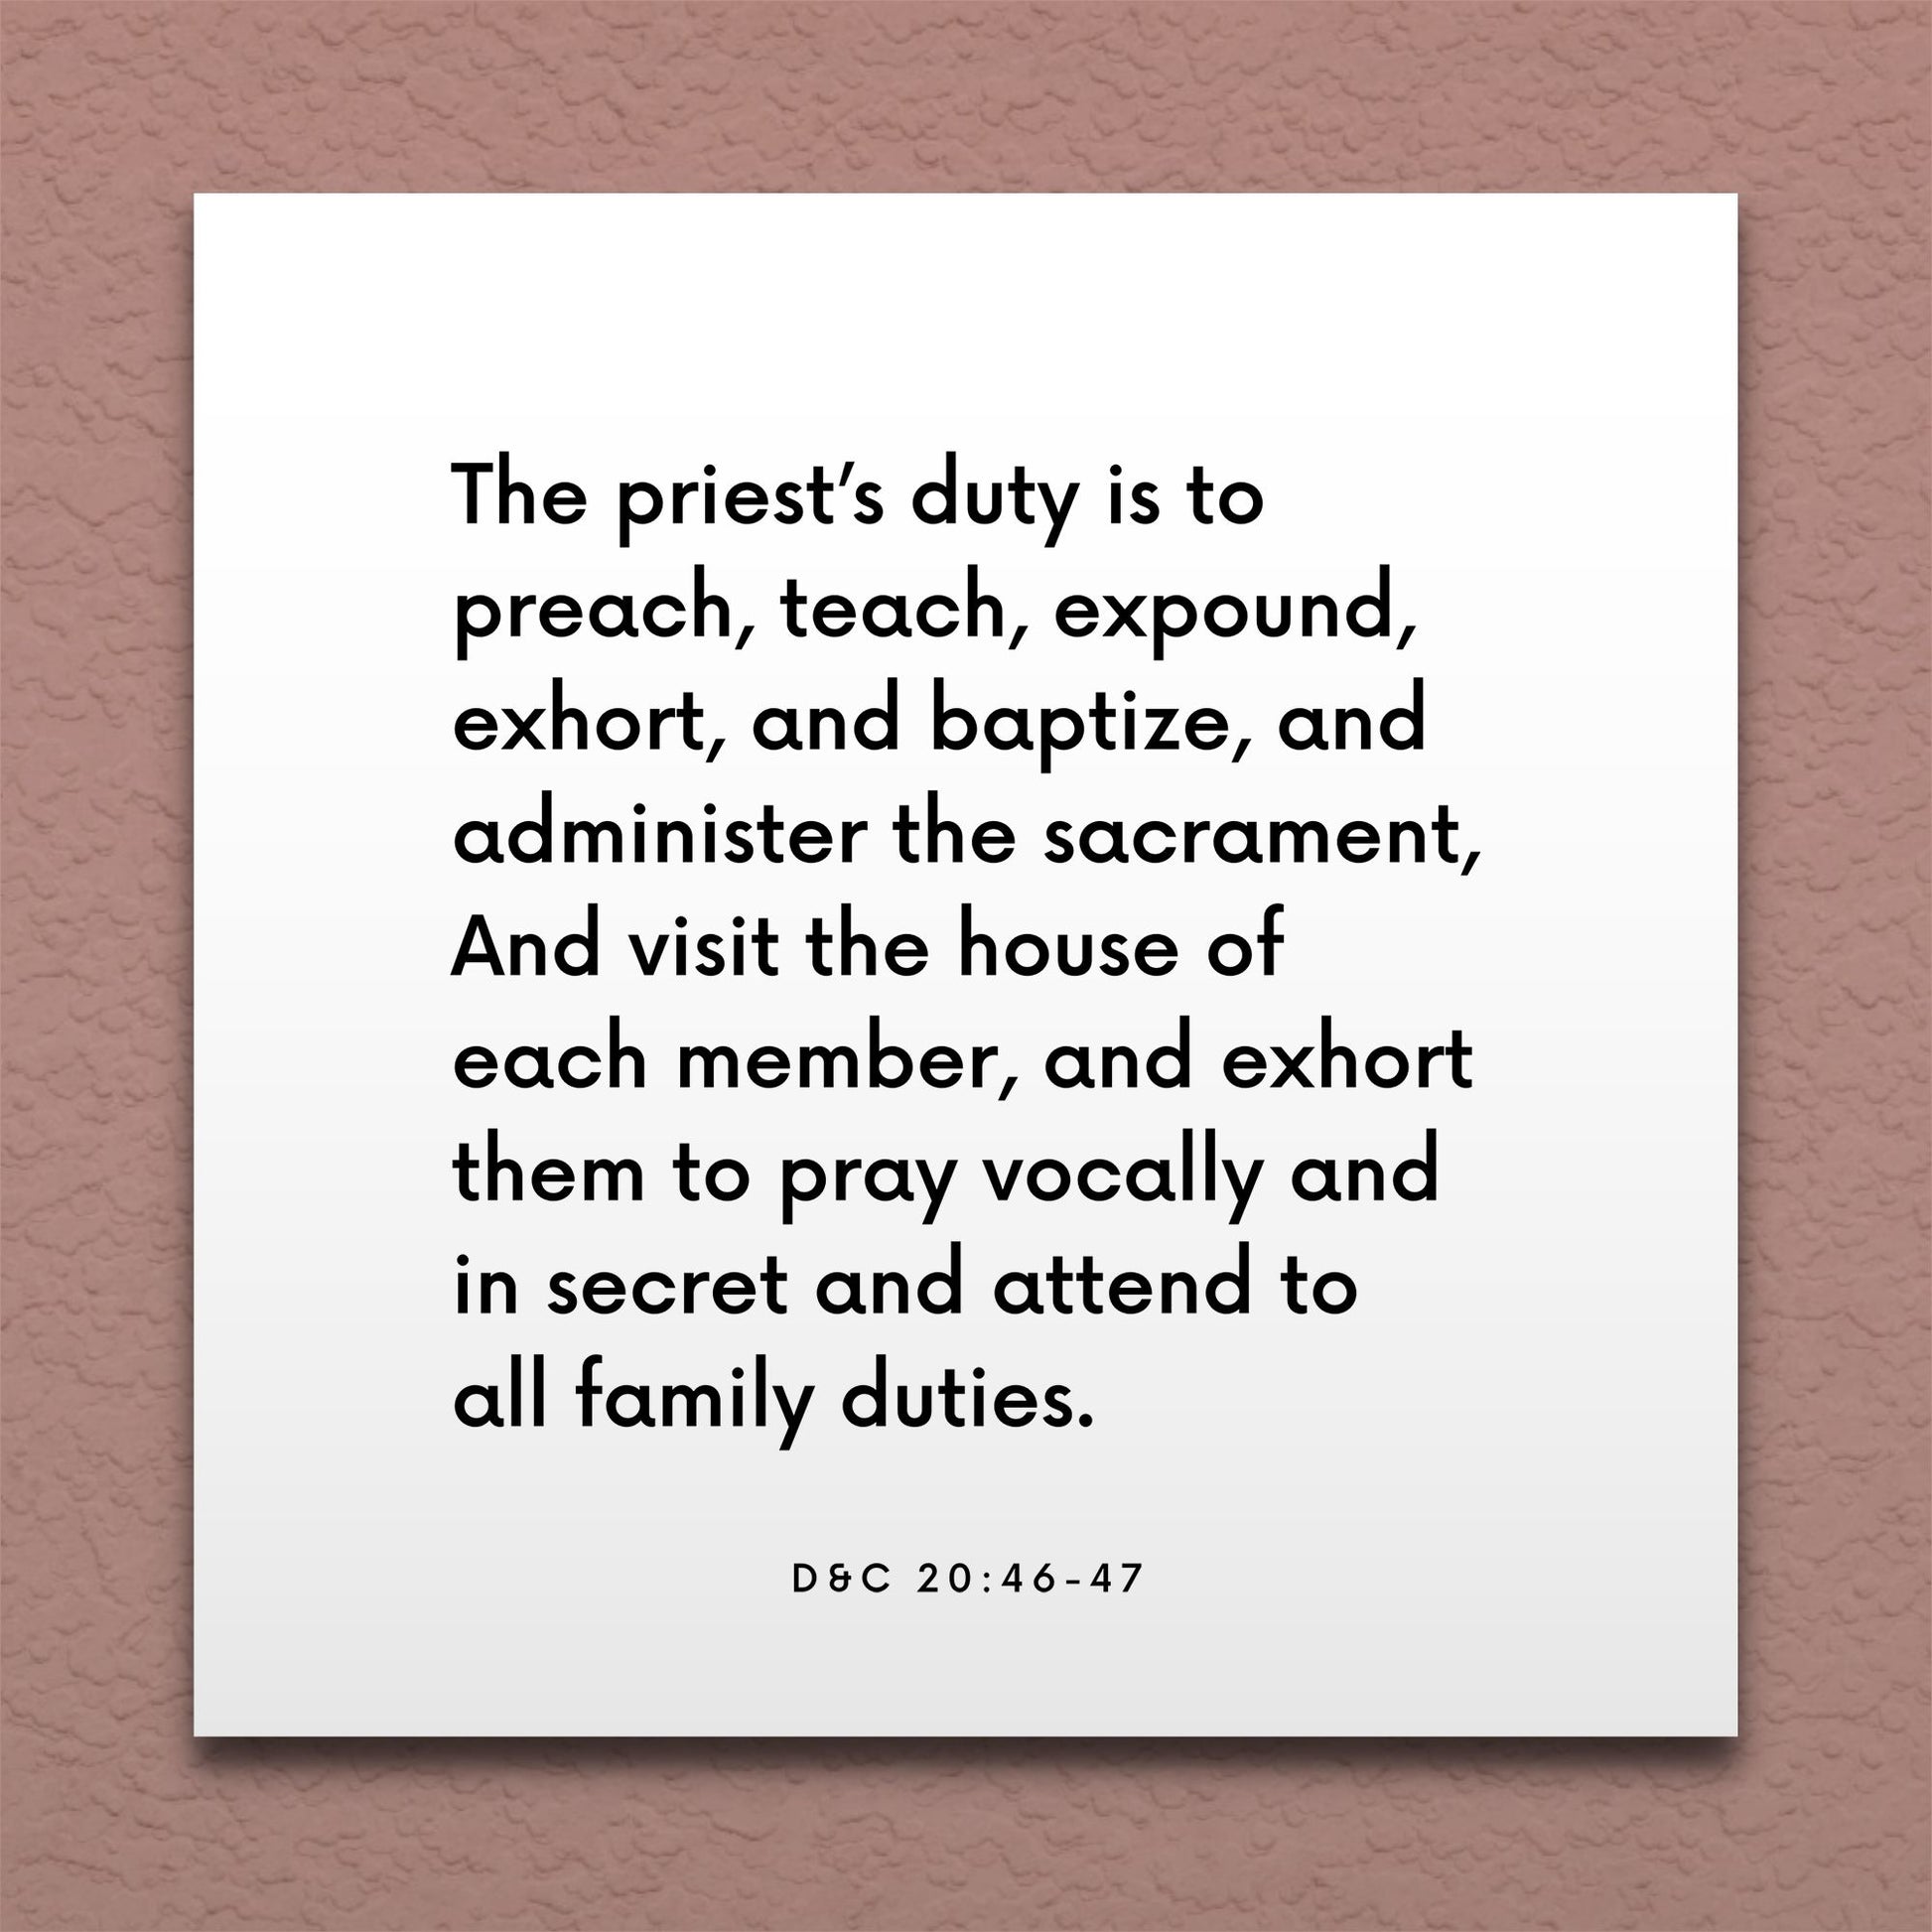 Wall-mounted scripture tile for D&C 20:46-47 - "The duties of a Priest"